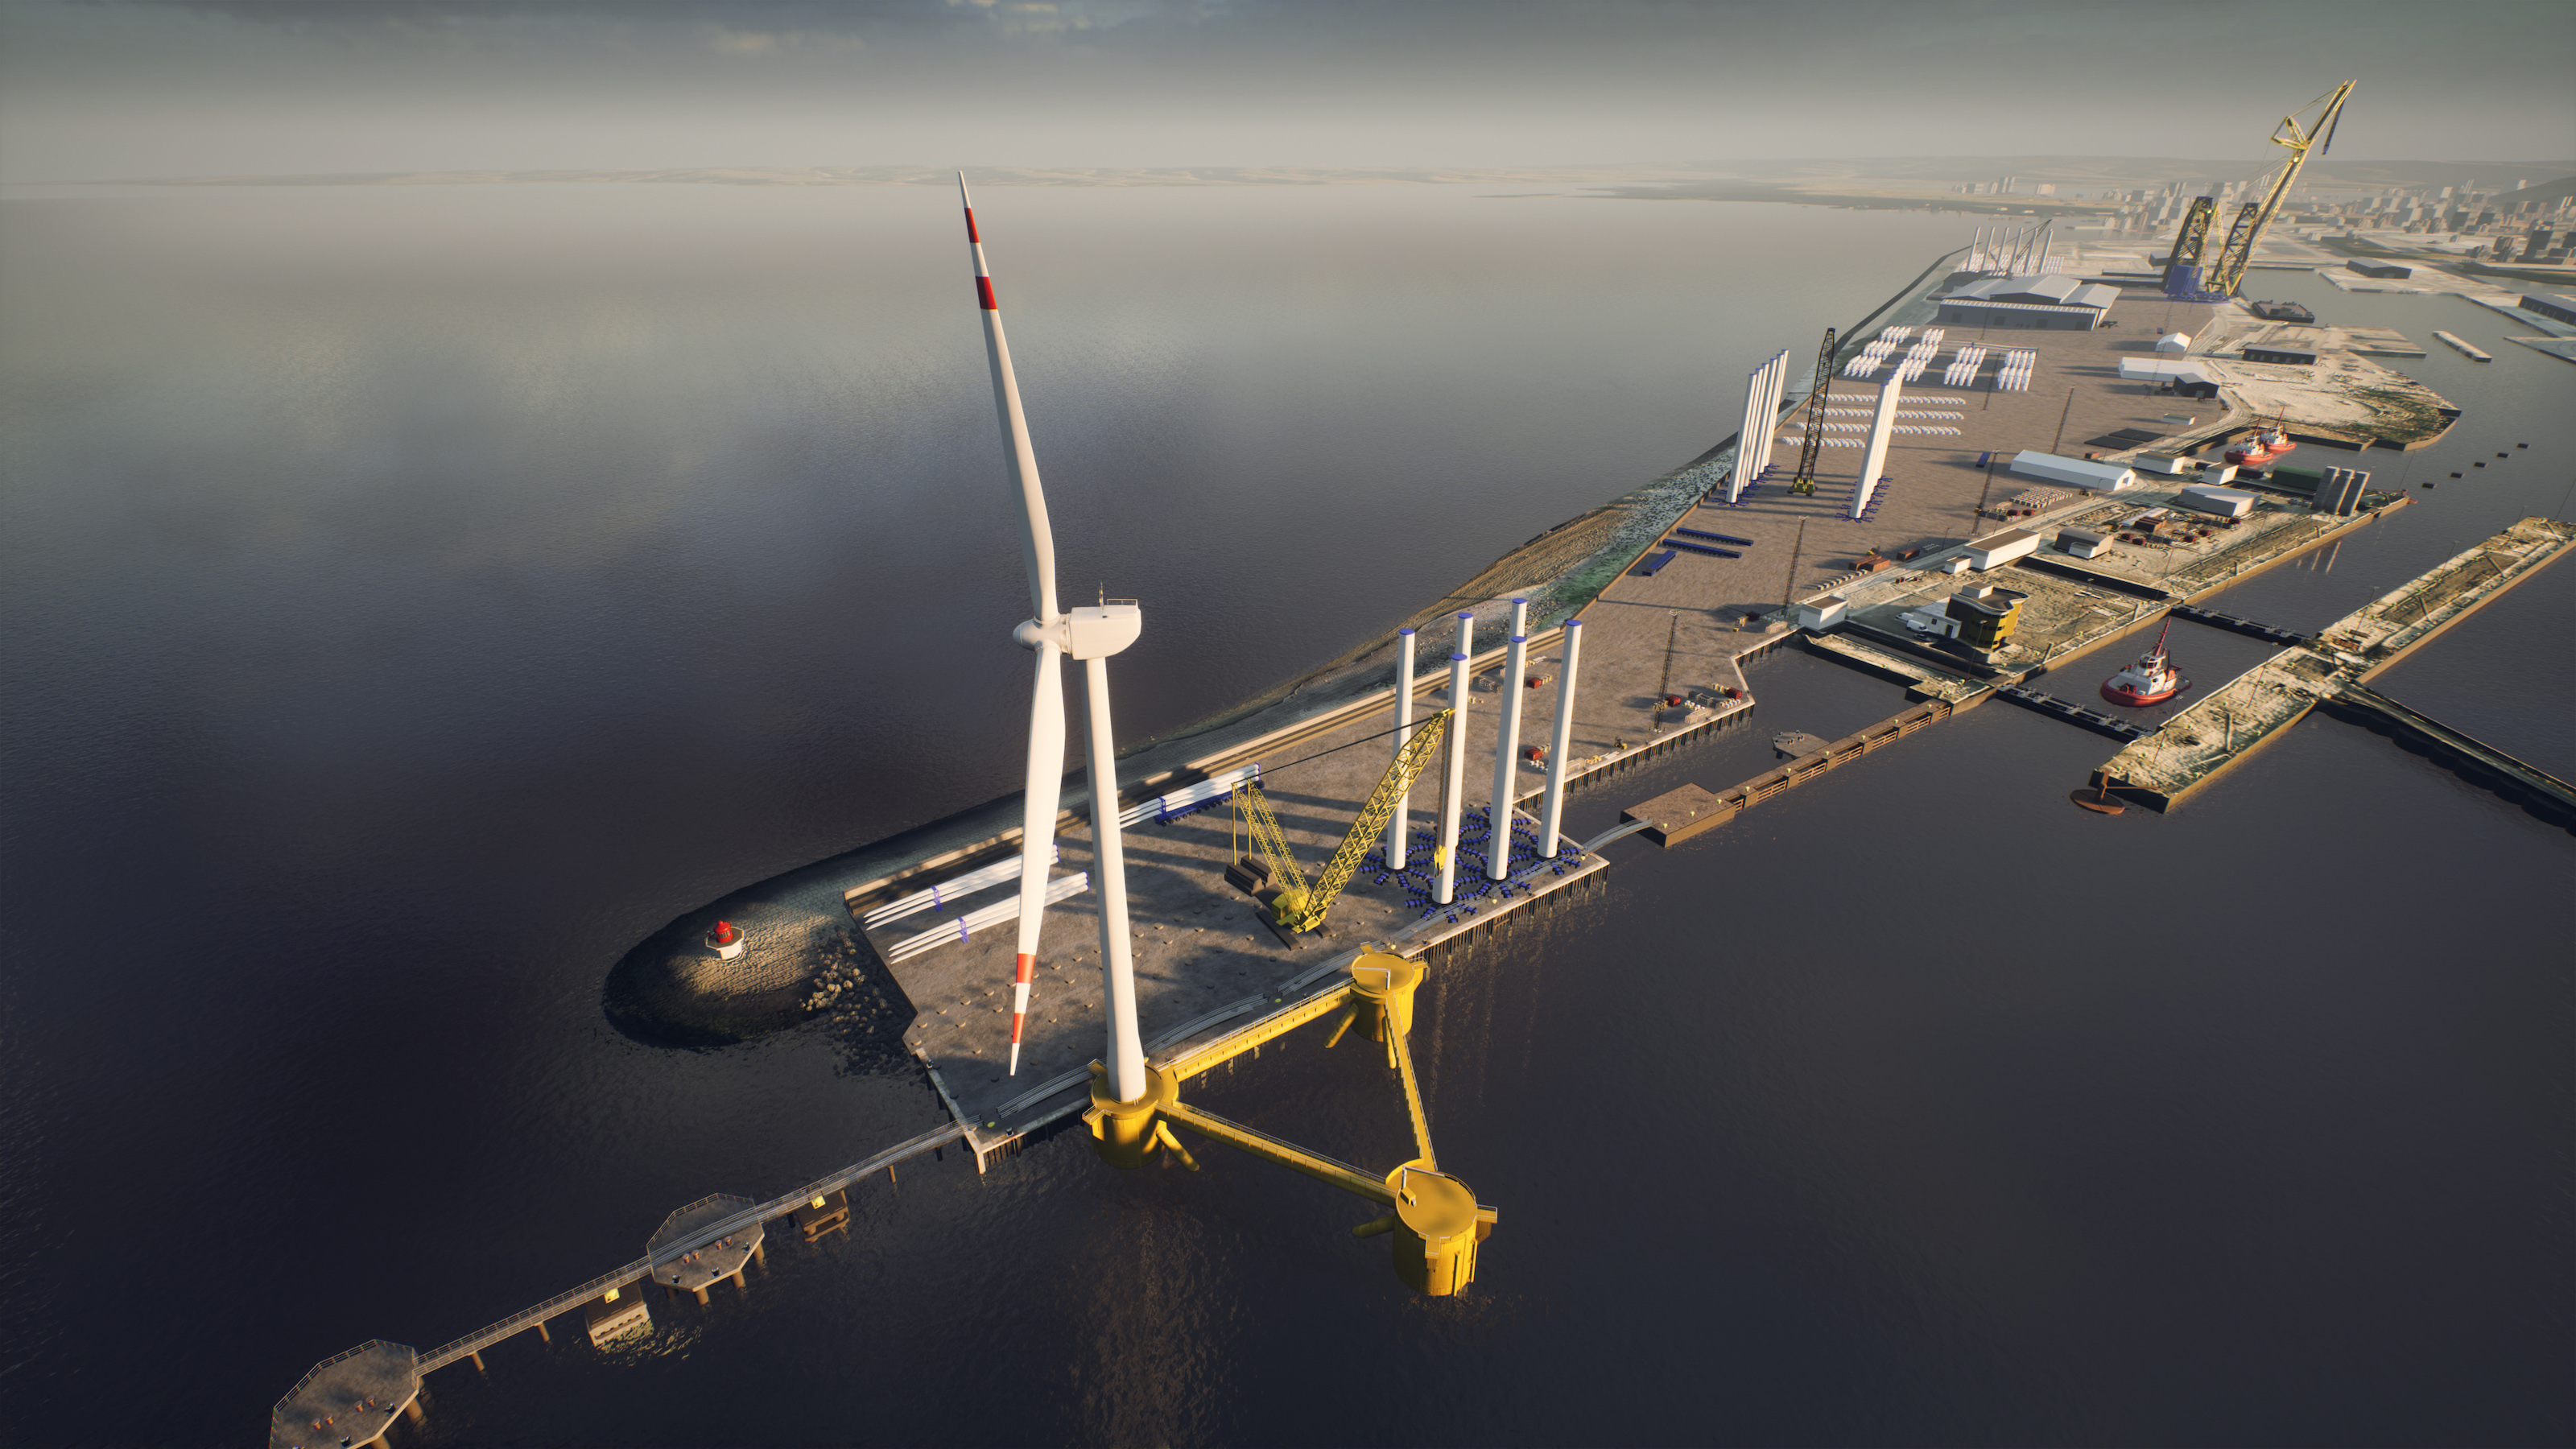 An artist's impression of the planned new Leith outer berth with Floating Foundation and Turbine